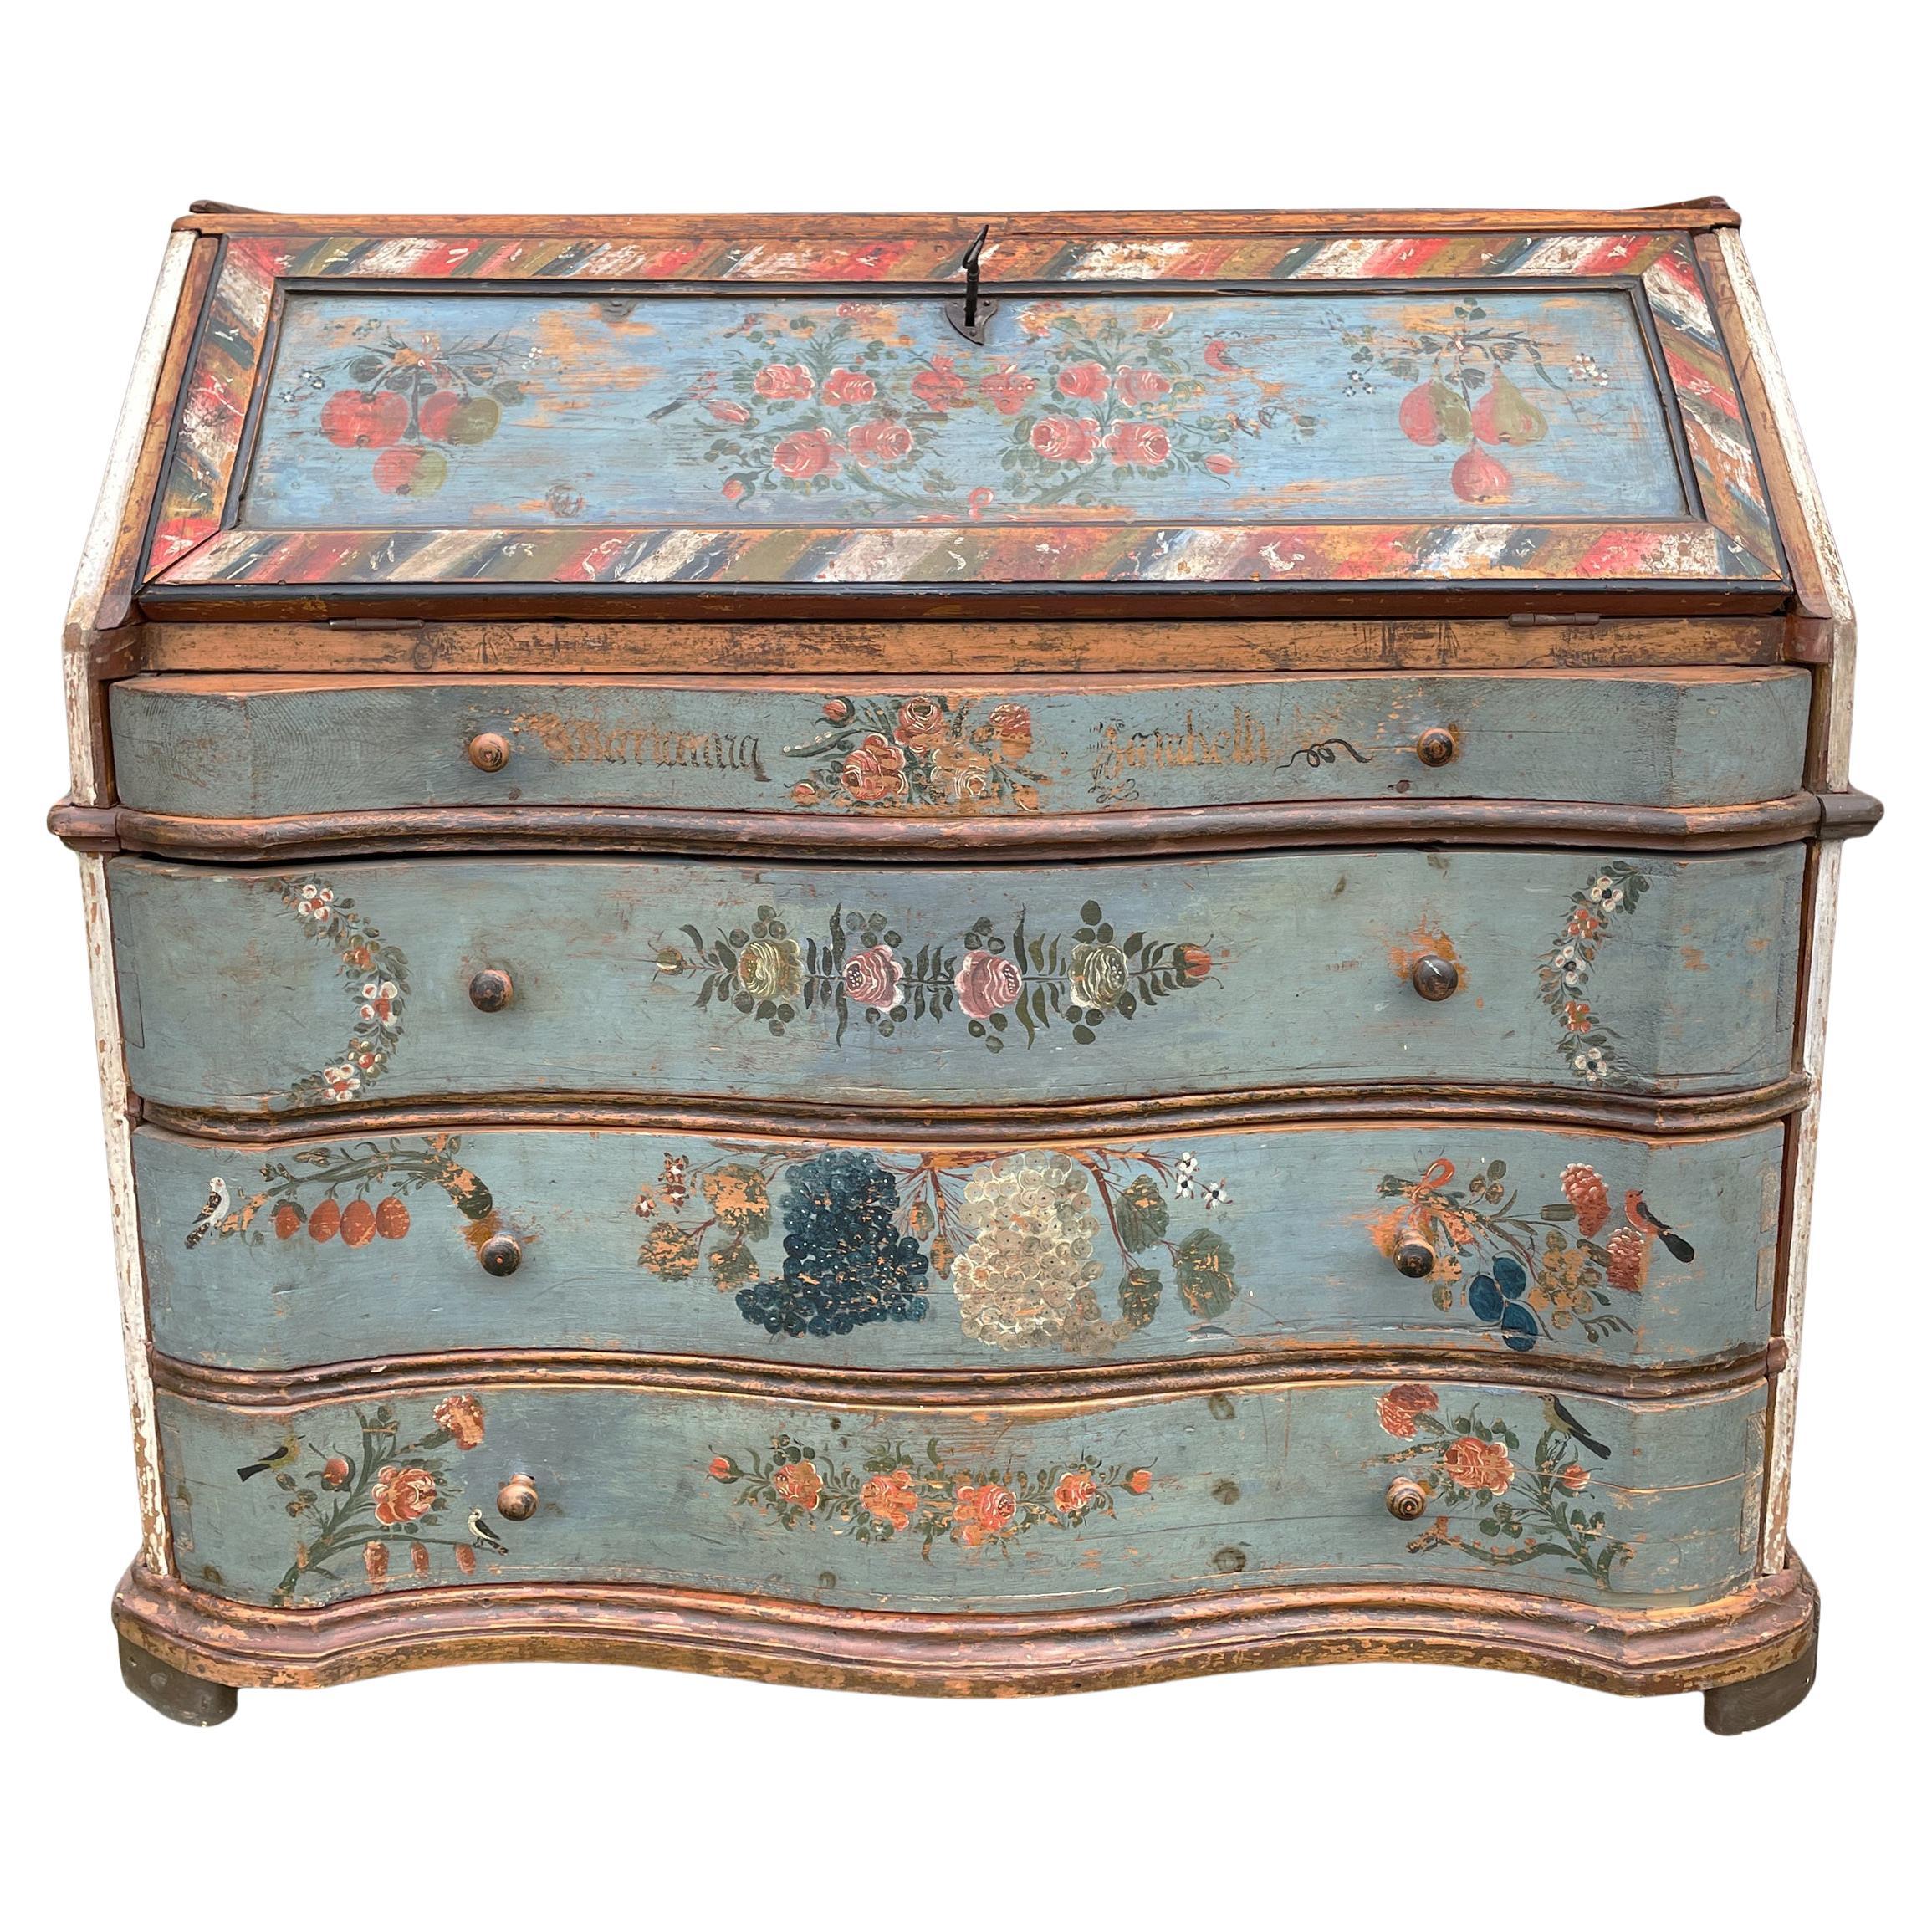 1780 Italian Shaped and Floral Painted Secretaire